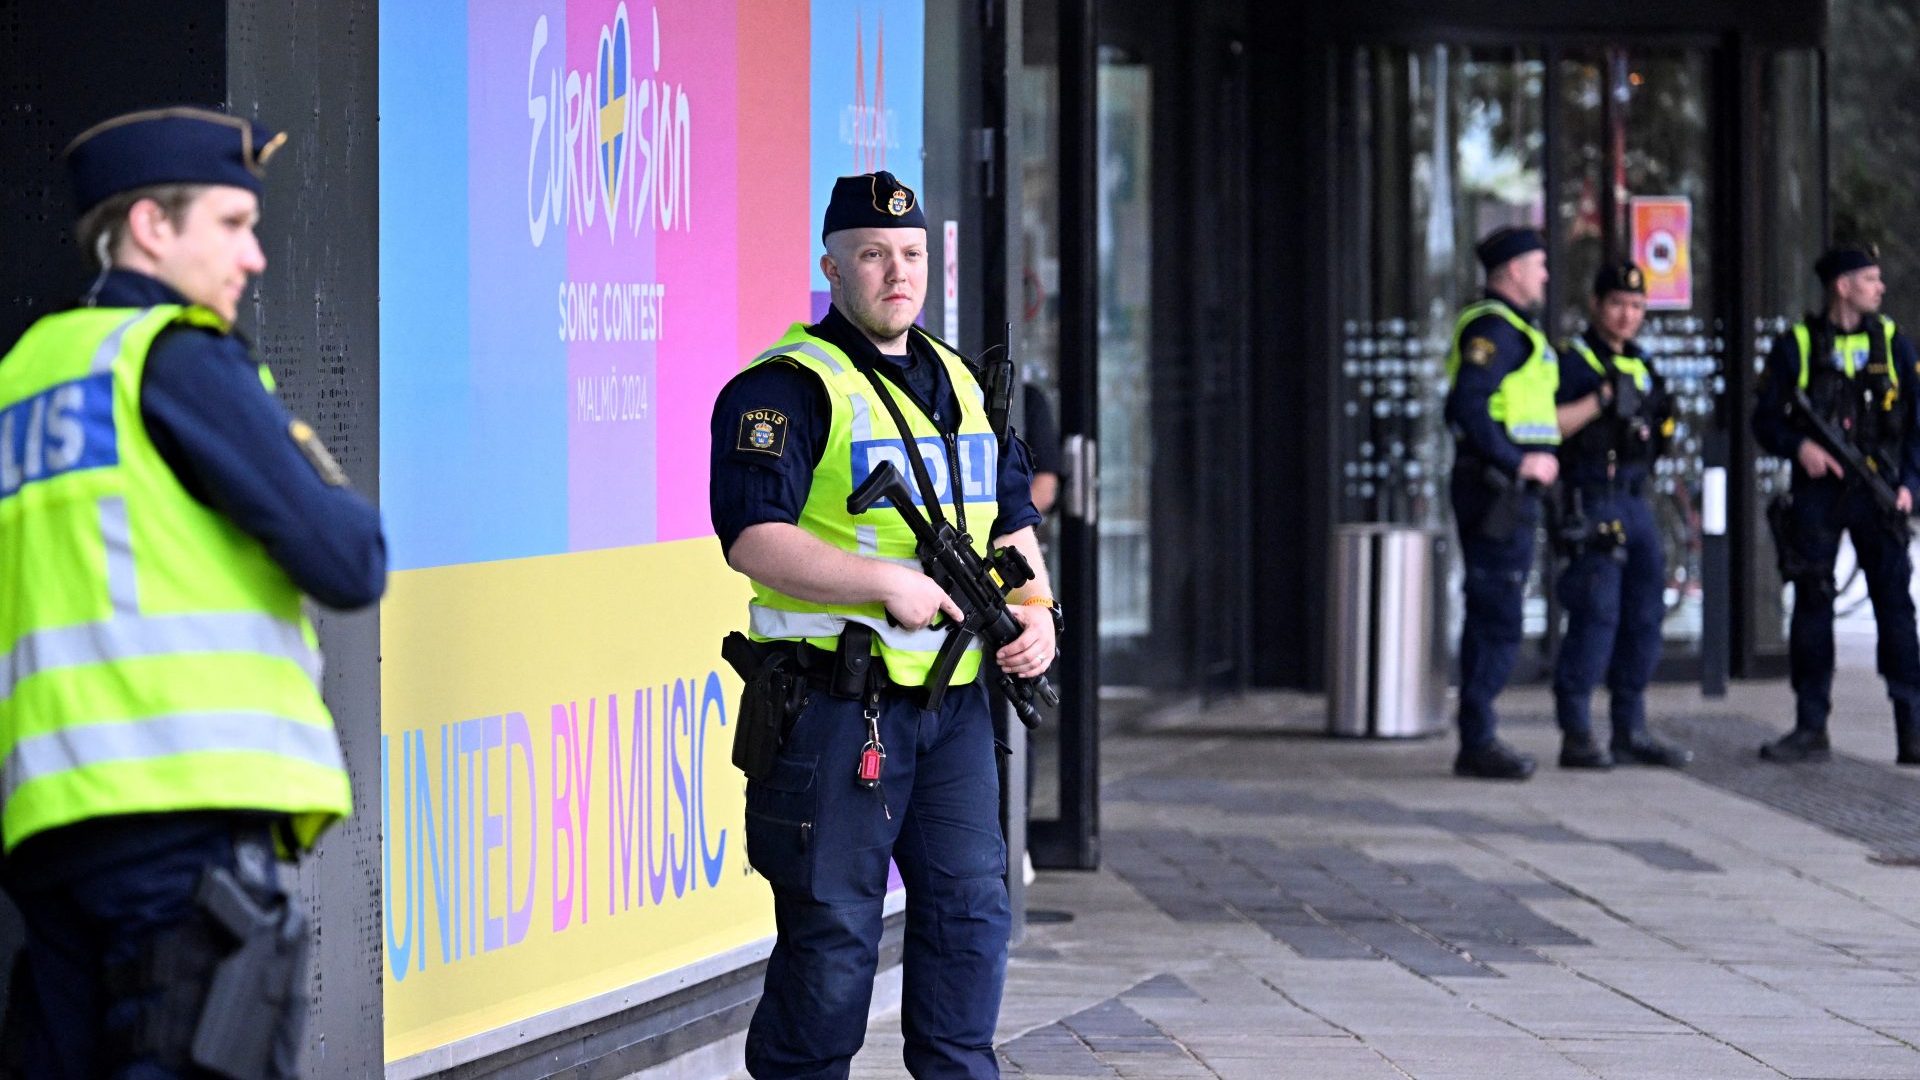 Police patrol outside the venue for the opening ceremony of the 68th Eurovision Song Contest in Malmö, Sweden. The final takes place on May 11. Photo: Johan Nilsson/TT News/AFP/Getty